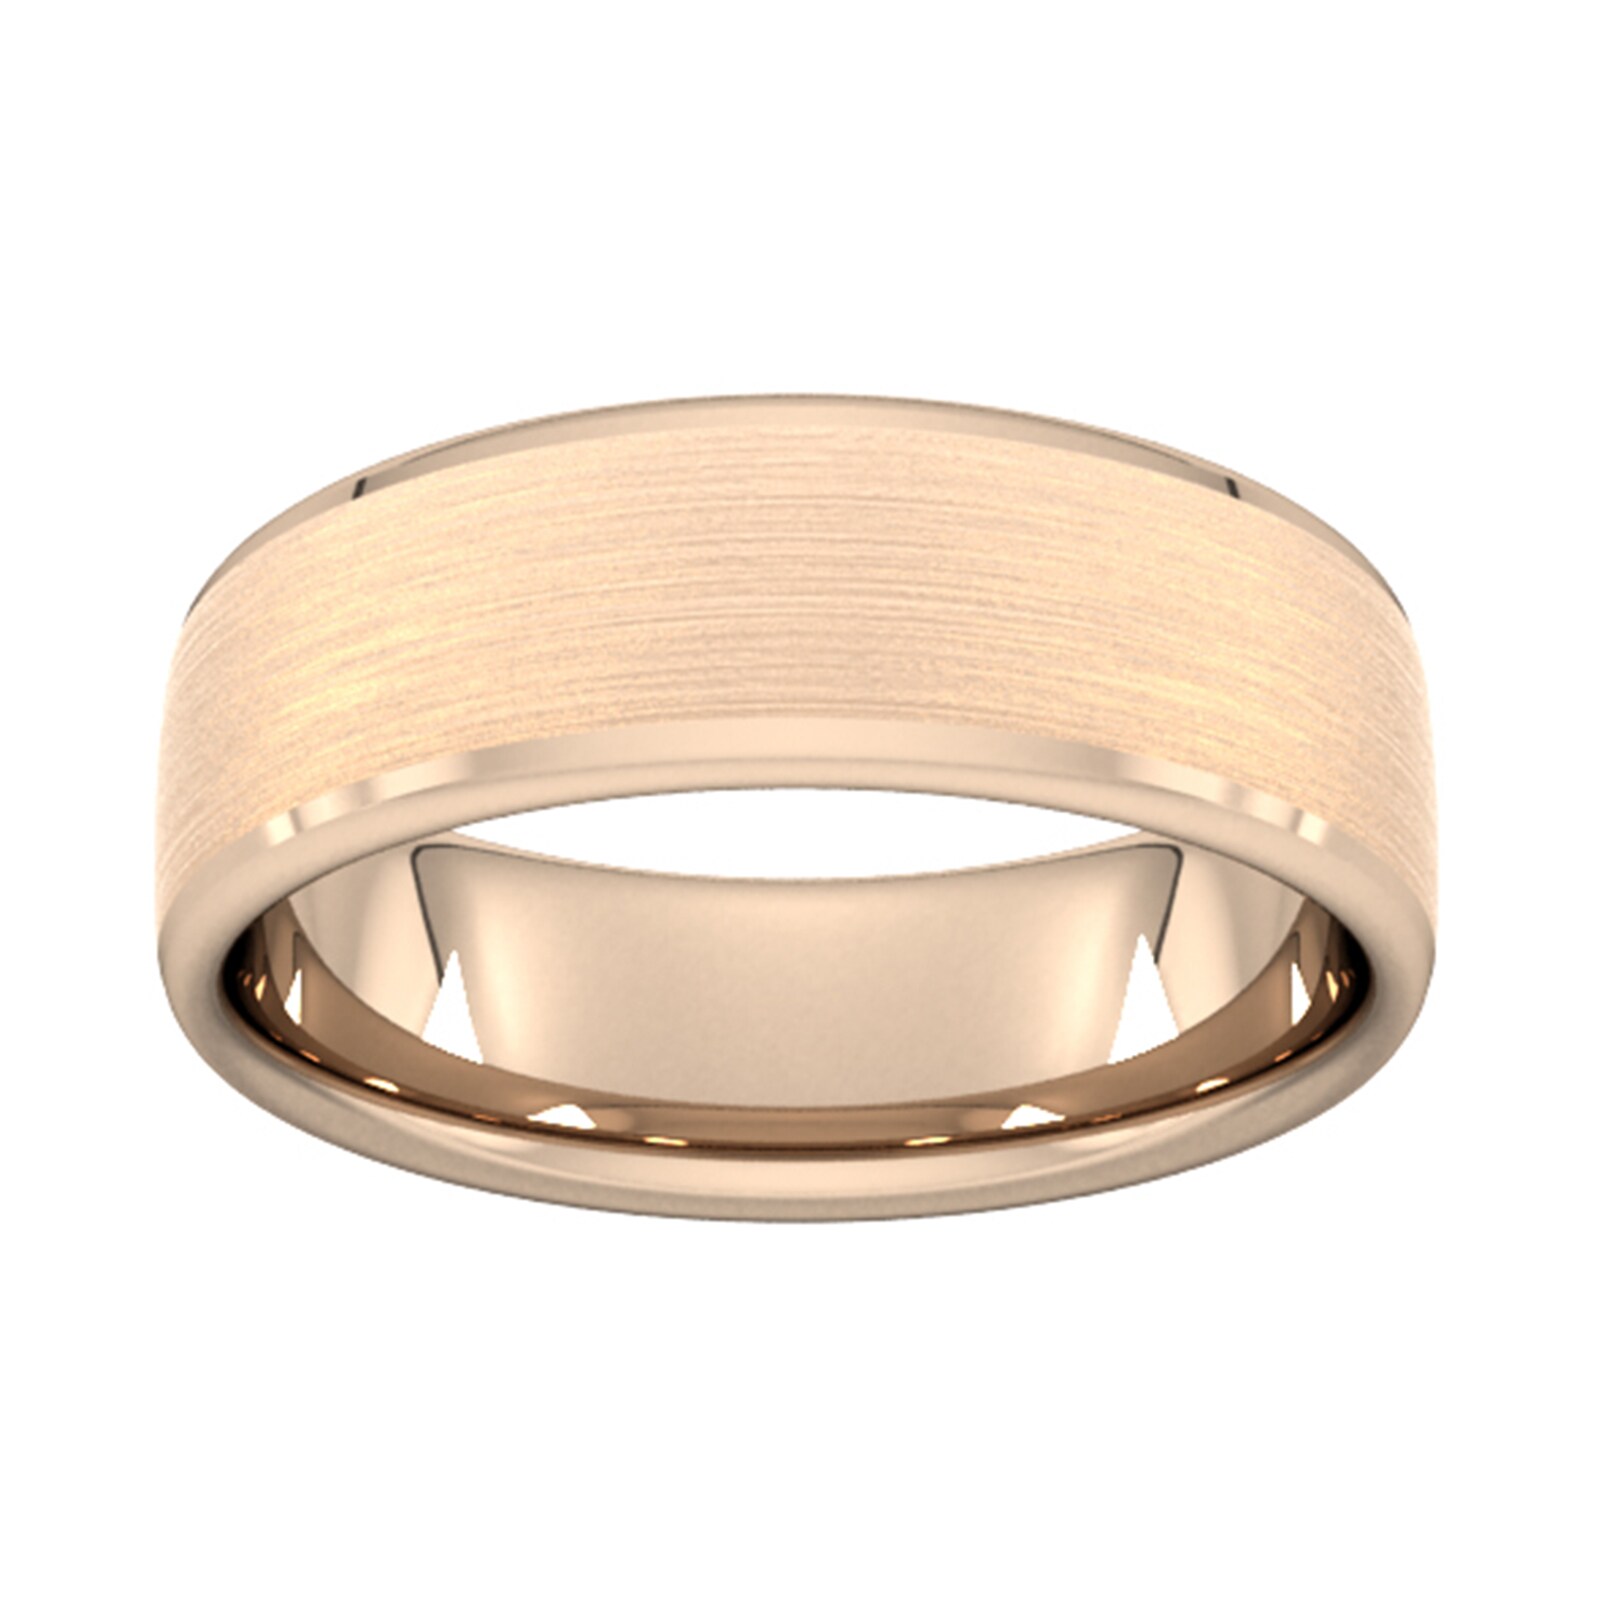 7mm Traditional Court Heavy Polished Chamfered Edges With Matt Centre Wedding Ring In 9 Carat Rose Gold - Ring Size L